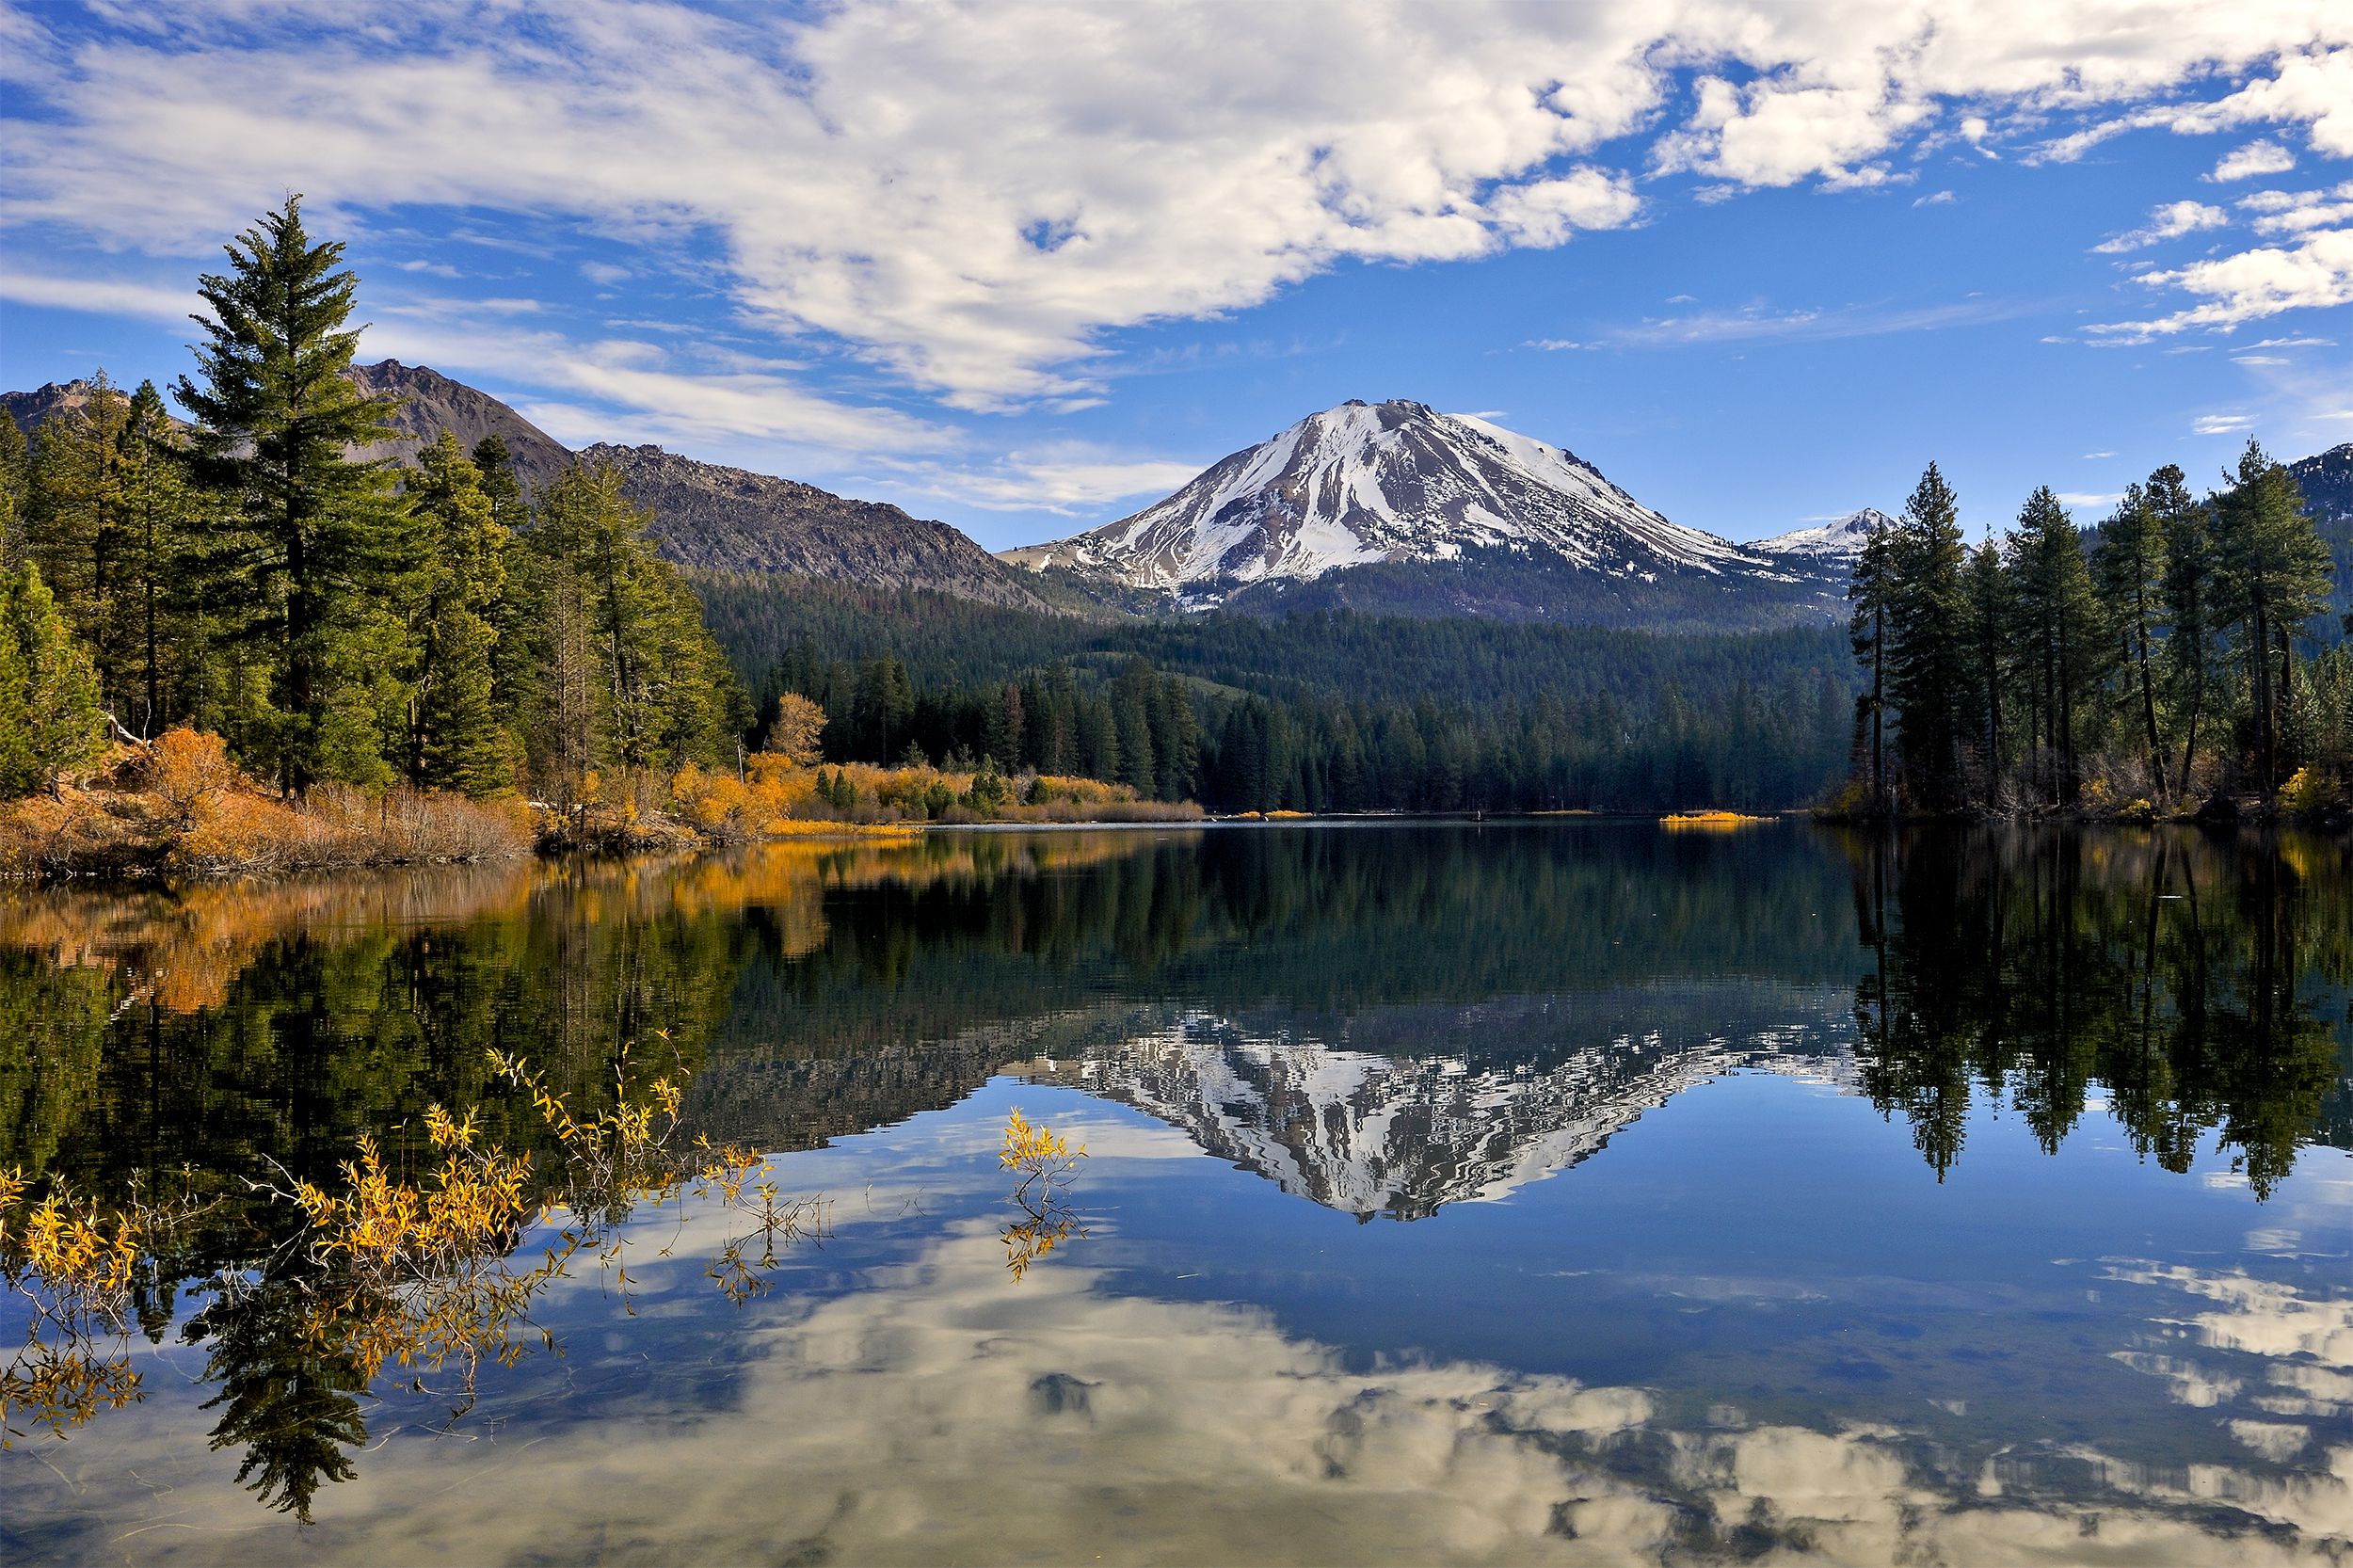 <p>As its name implies, <a href="https://www.nps.gov/lavo/index.htm">Lassen Volcanic National Park</a> includes a number of volcanic features ranging from fumaroles (steam and volcanic-gas vents), to thumping mud pots, boiling pools, and steaming ground. Perhaps its most famous feature is Lassen Peak, a volcano that last erupted in 1914 and continued showing its fury for three long years.</p>